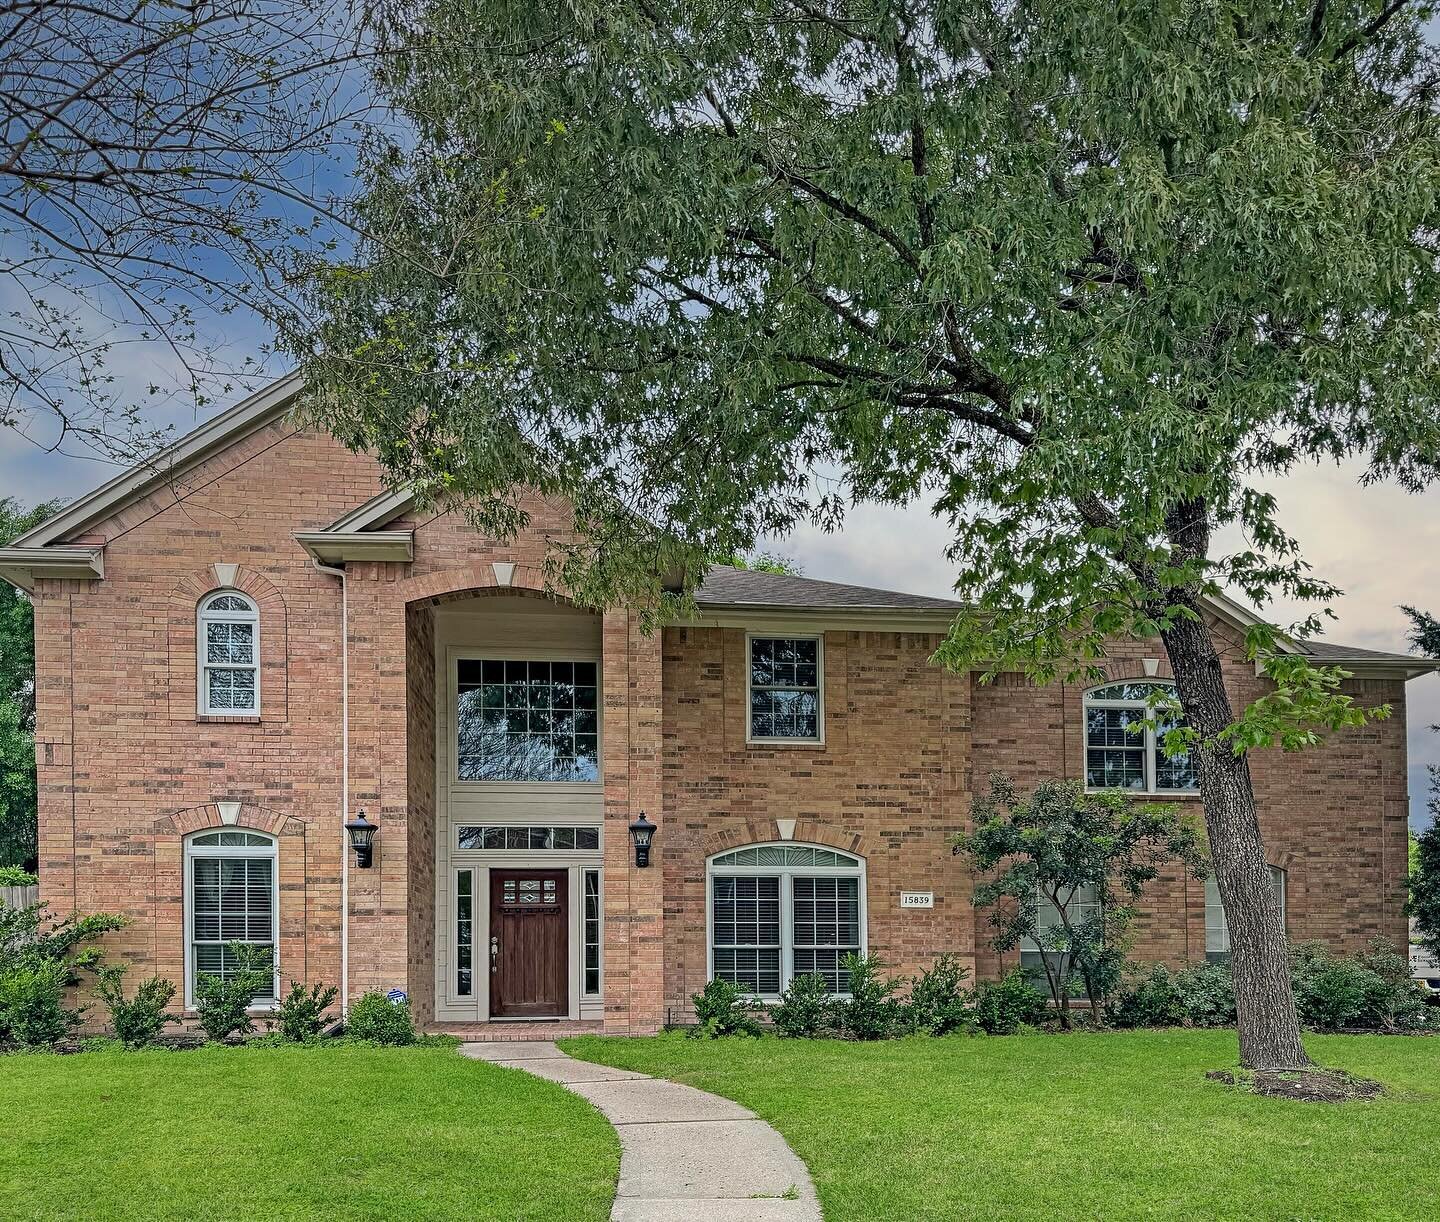 🏡 Coming Soon to Tomball, TX! 🌳 Welcome Home to this stunning oversized, corner lot home nestled in the heart of the highly sought-after Lakewood Grove community.

Contact me for more information or to schedule a private tour and be the first to ex